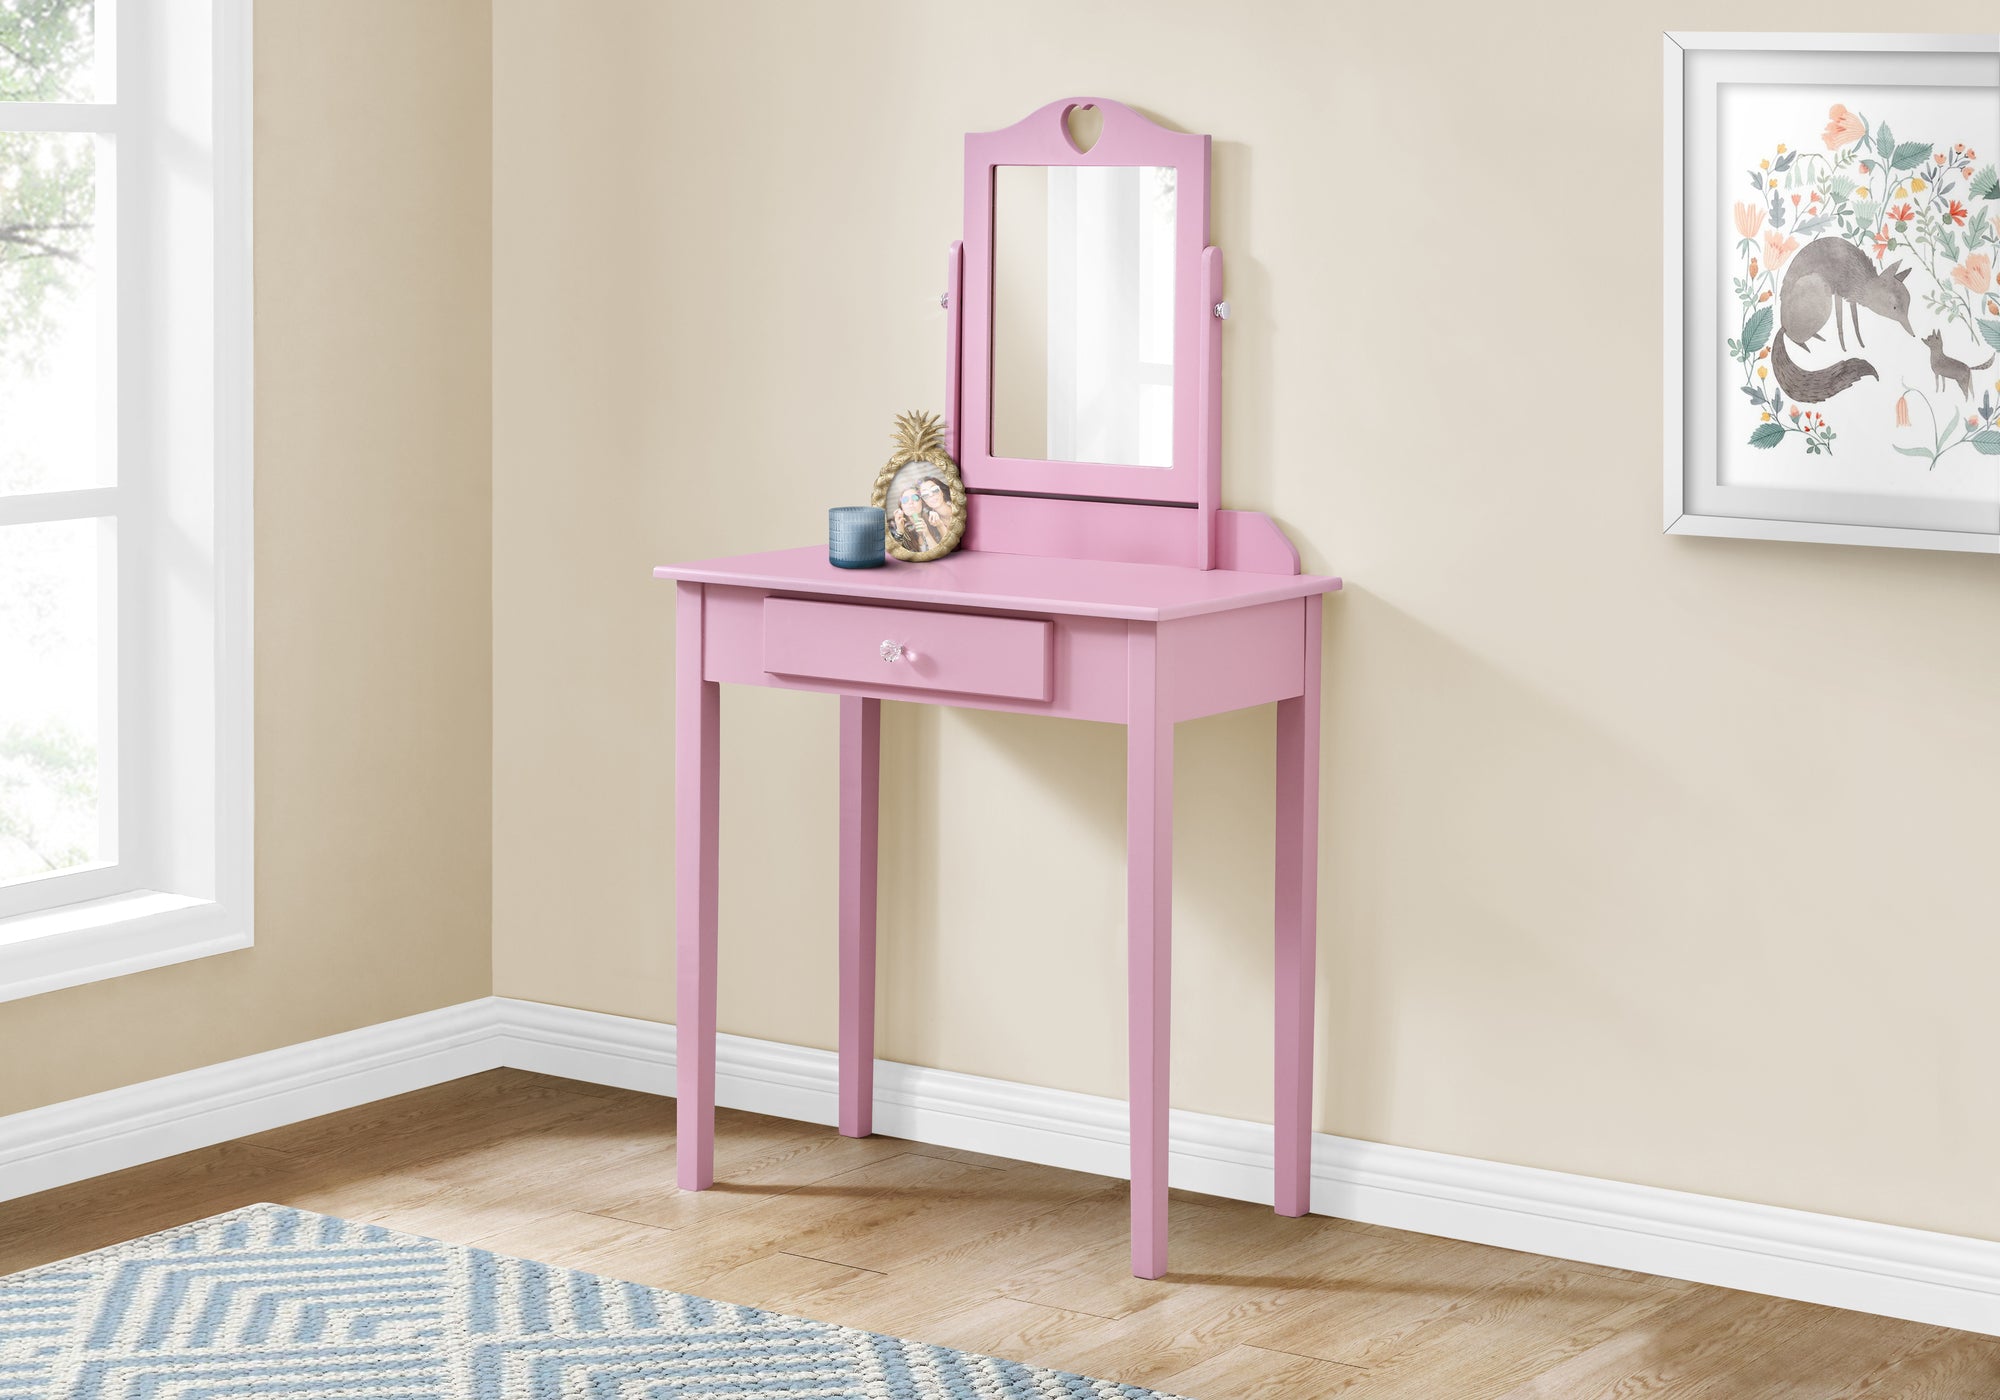 MN-303328    Vanity, Desk, Makeup Table, Organizer, Dressing Table, Bedroom, Wooden, Pink, Contemporary, Modern